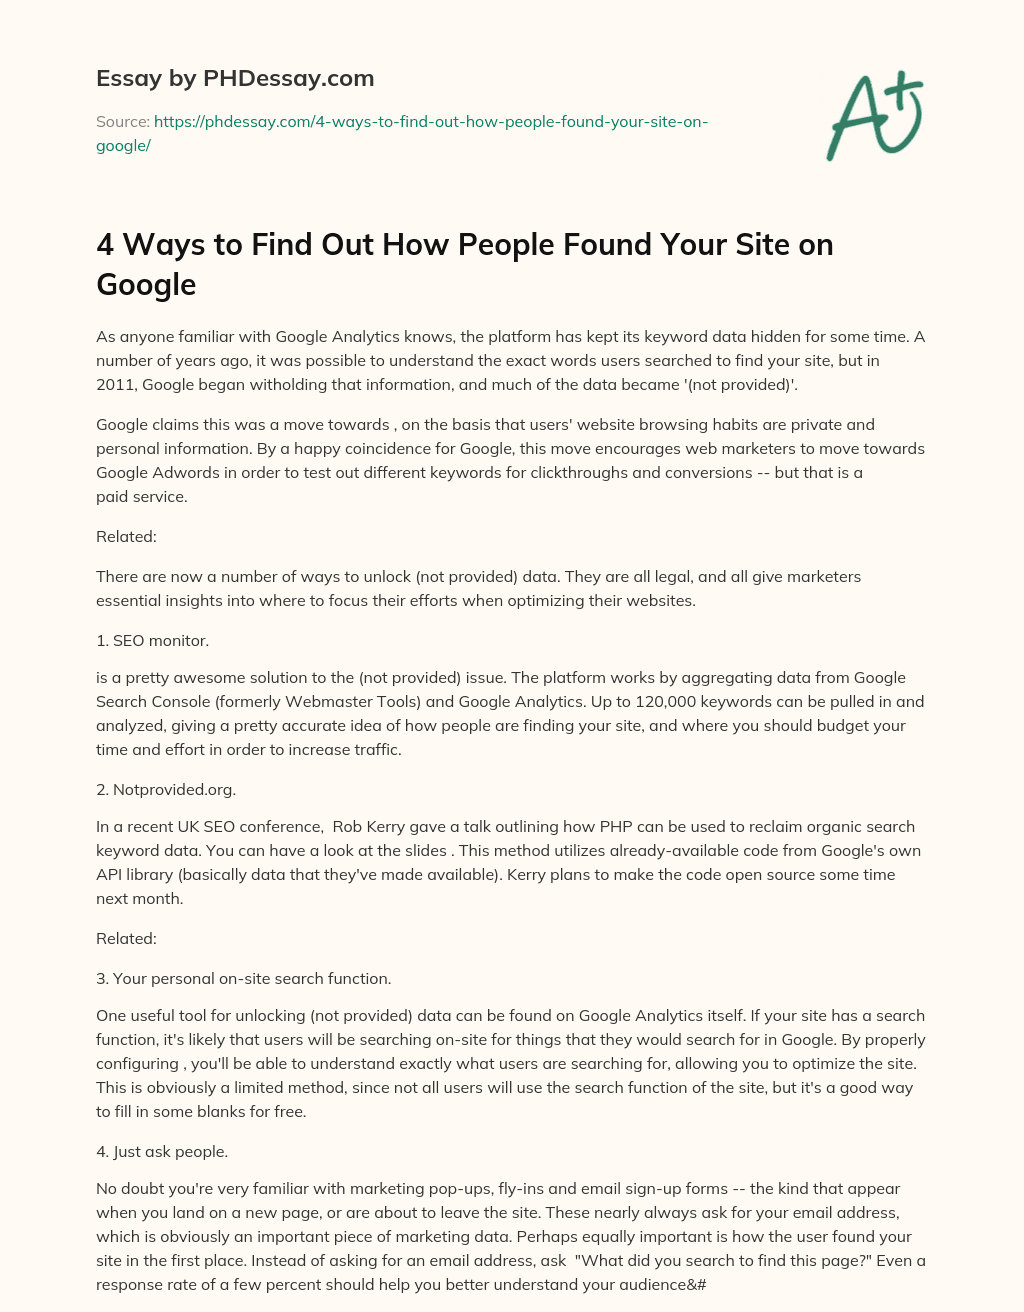 4 Ways to Find Out How People Found Your Site on Google essay